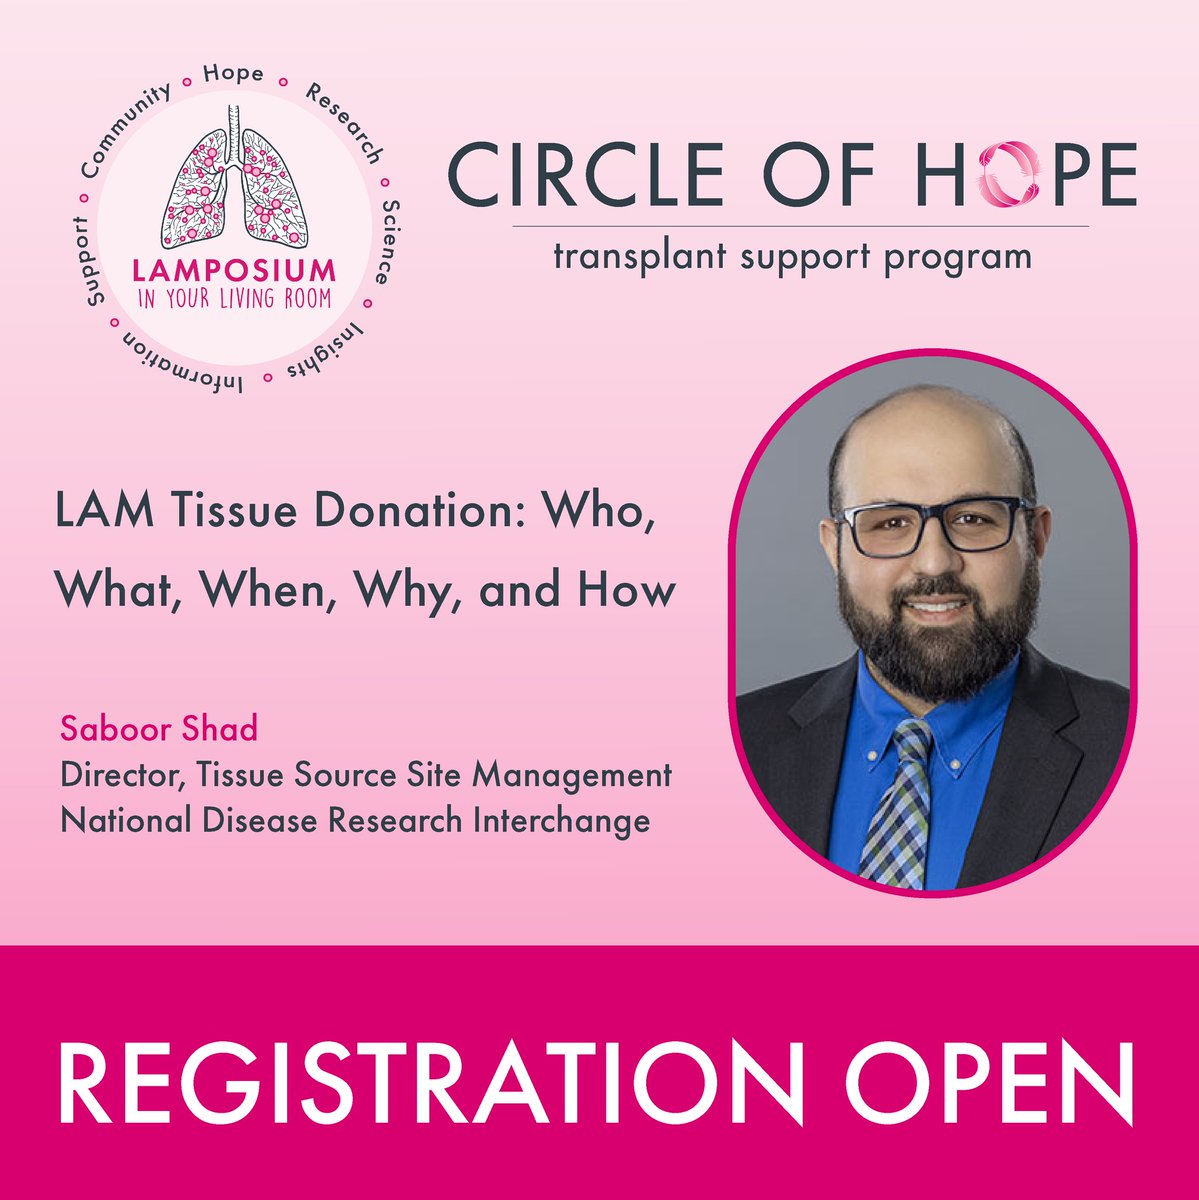 Join us tonight at 7 PM ET for LAM Tissue Donation: Who, What, When, Why, and How, a LAMposium in Your Living Room Circle of Hope (COH) webinar. 

Saboor Shad, at the NDRI, explains the details of donating LAM tissue for research.  

Learn more: bit.ly/3TFdgfA